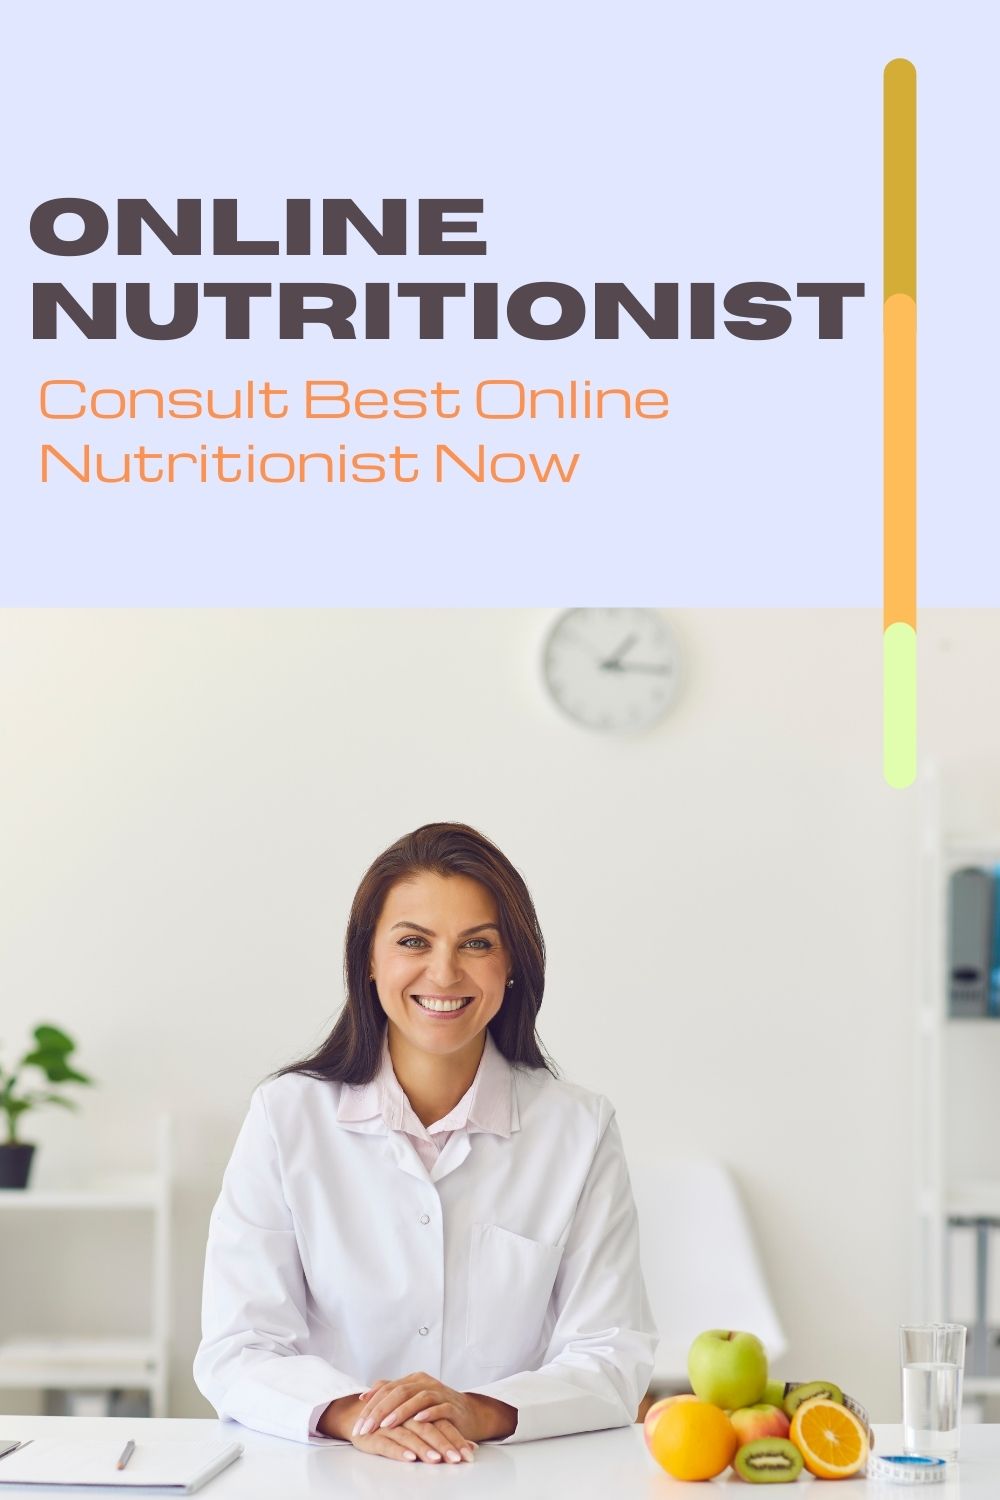 Consult the best online nutritionist now